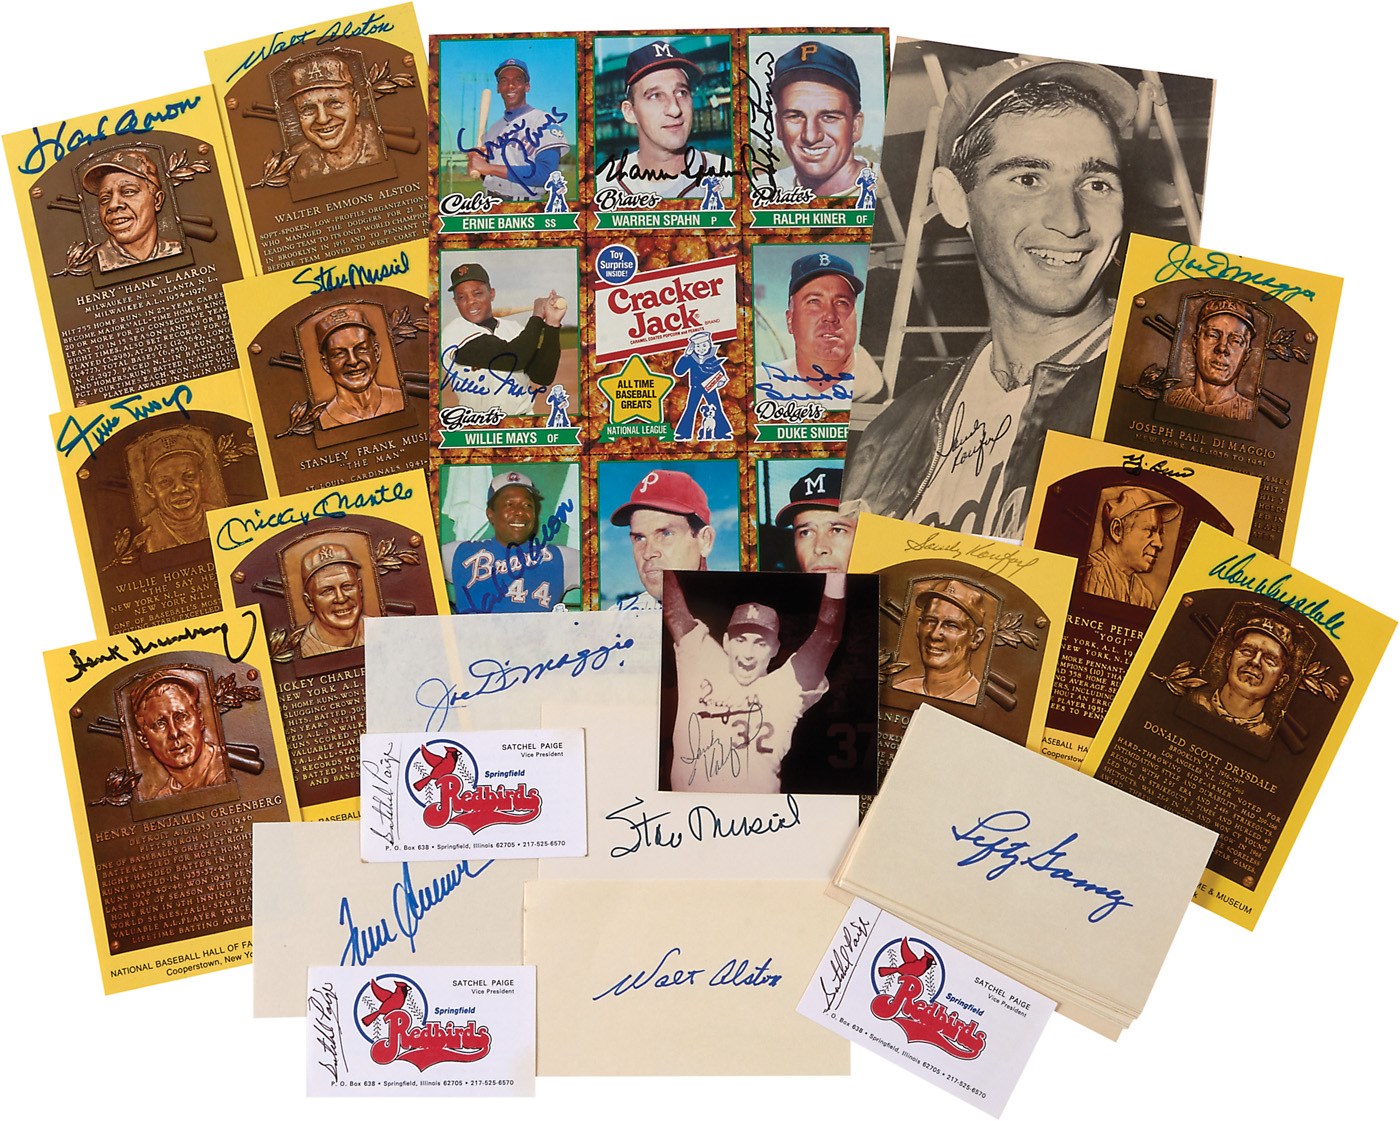 Baseball Autographs - Huge Hall of Fame Autograph Collection w/Mantle, DiMaggio, Paige & more (300+)